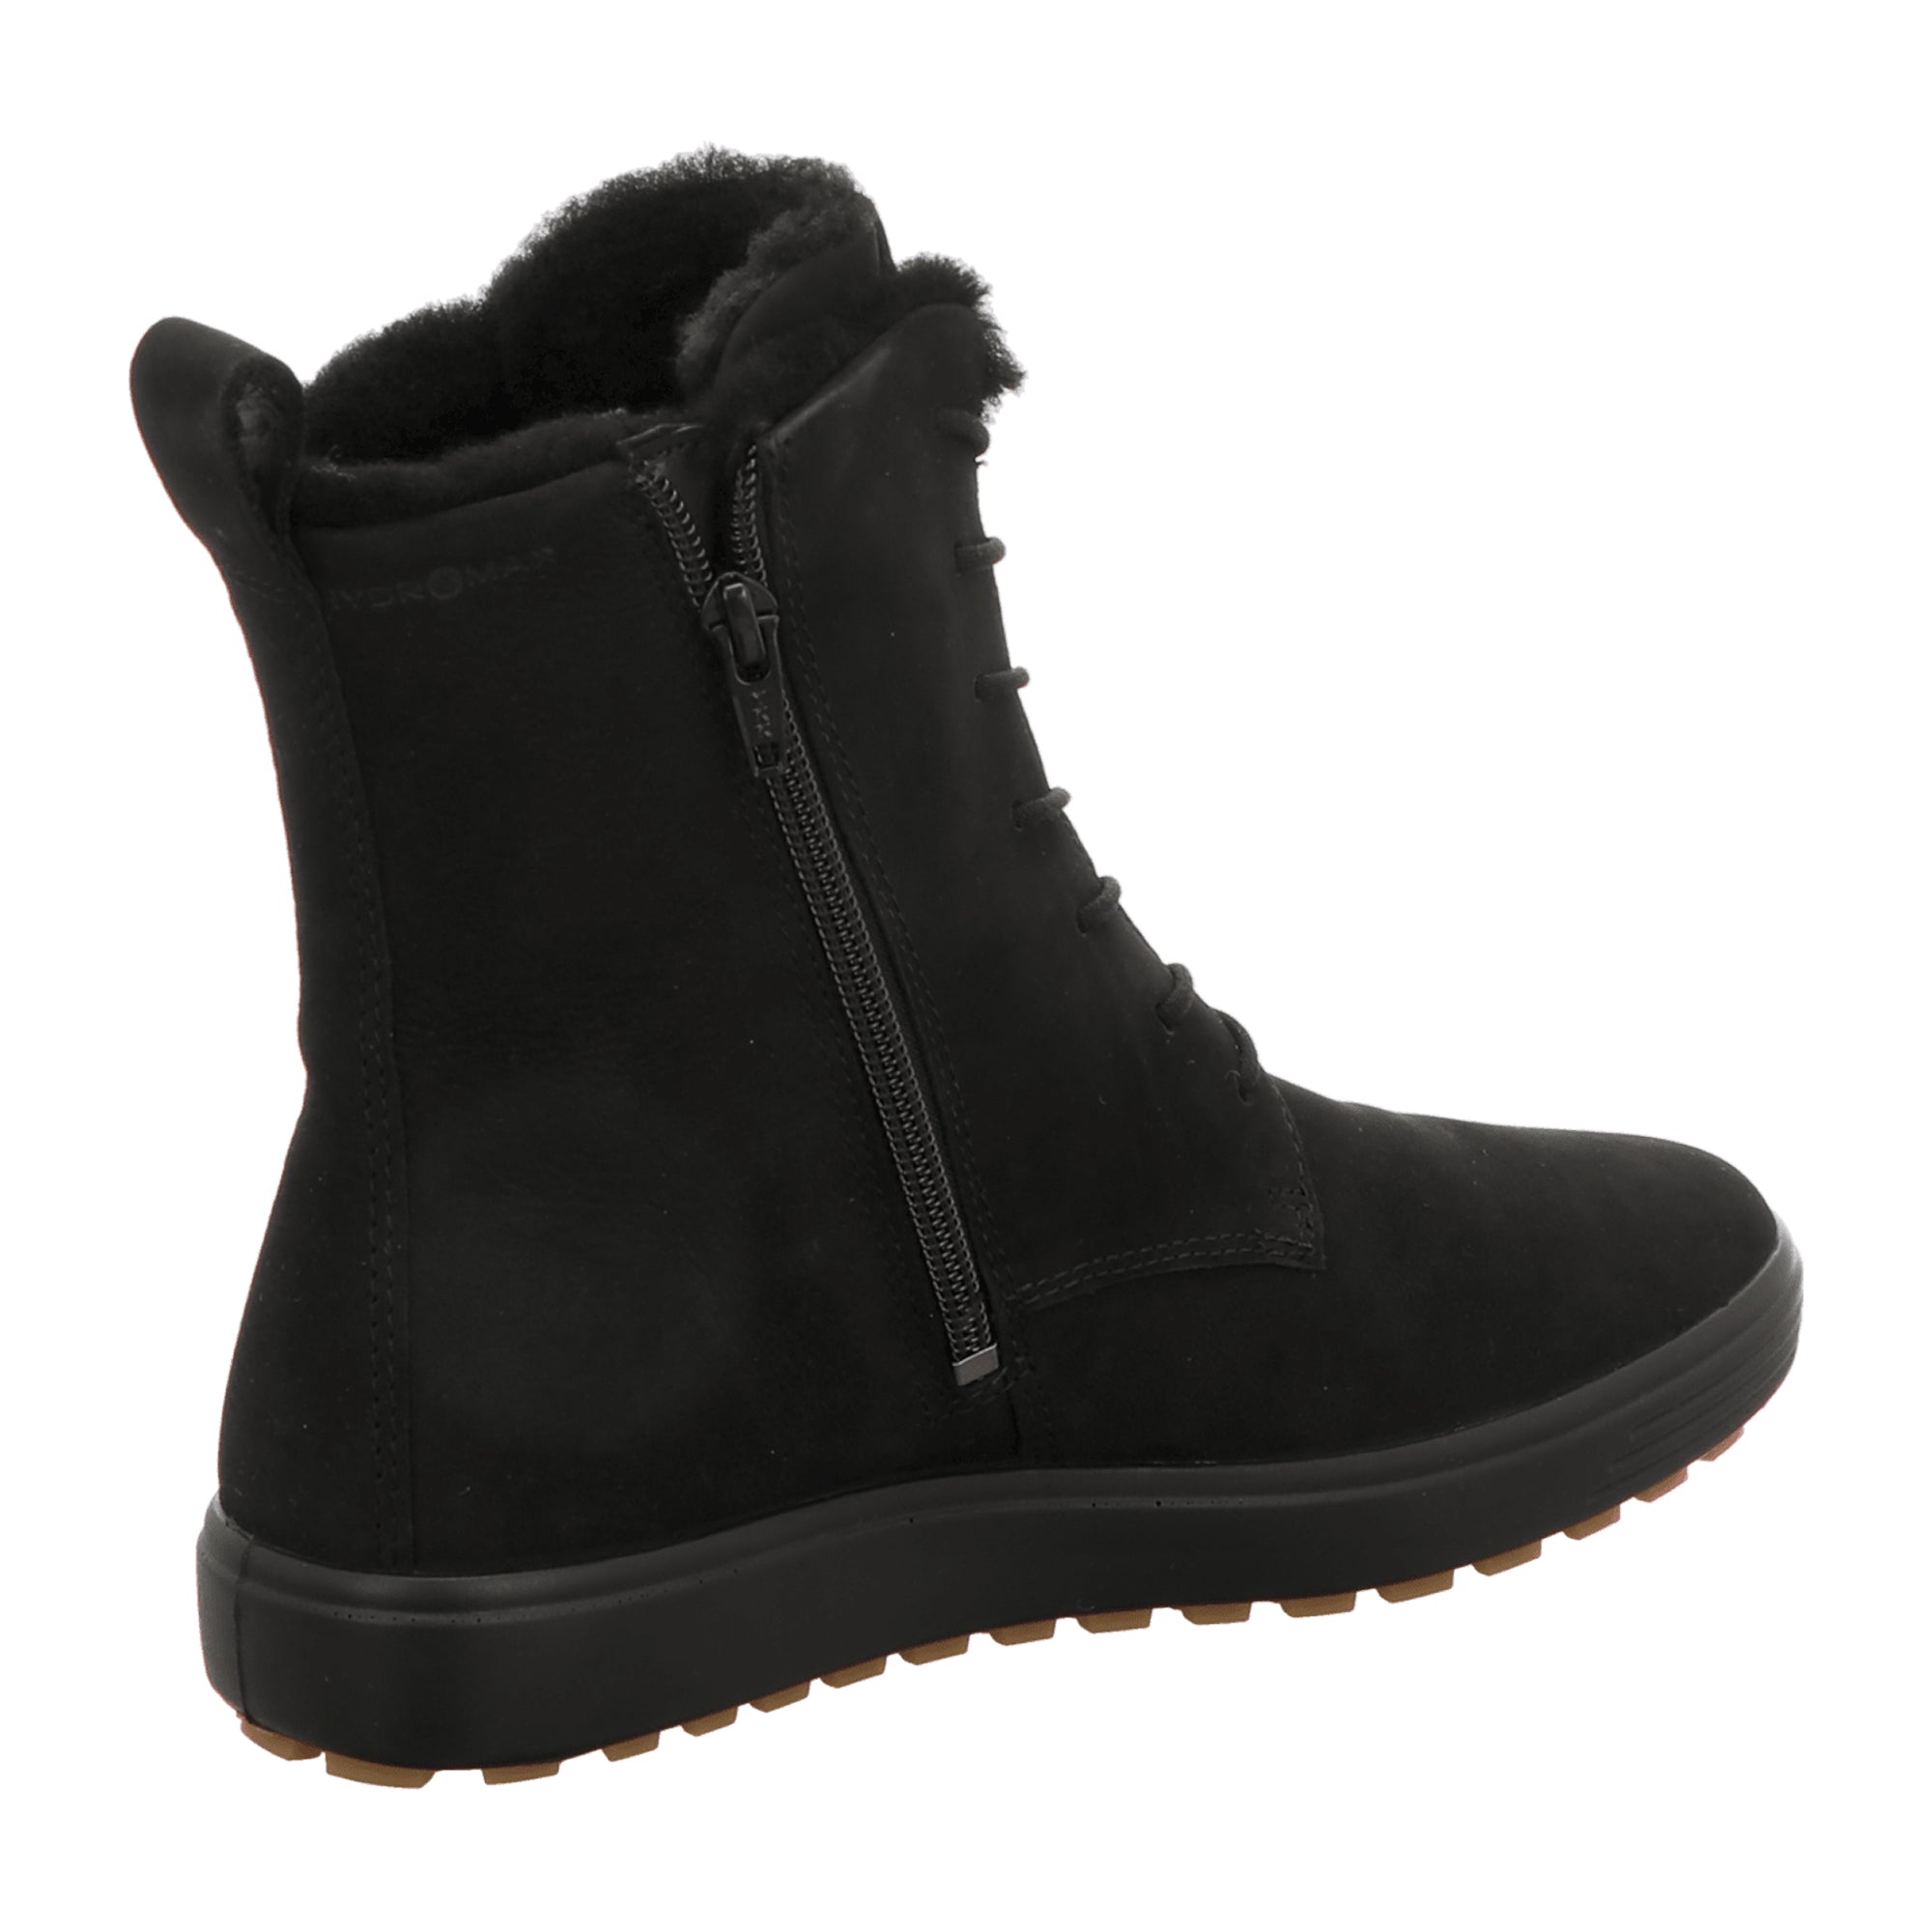 Ecco Soft 7 Tred Women's Black Winter Boots with Warm Lining